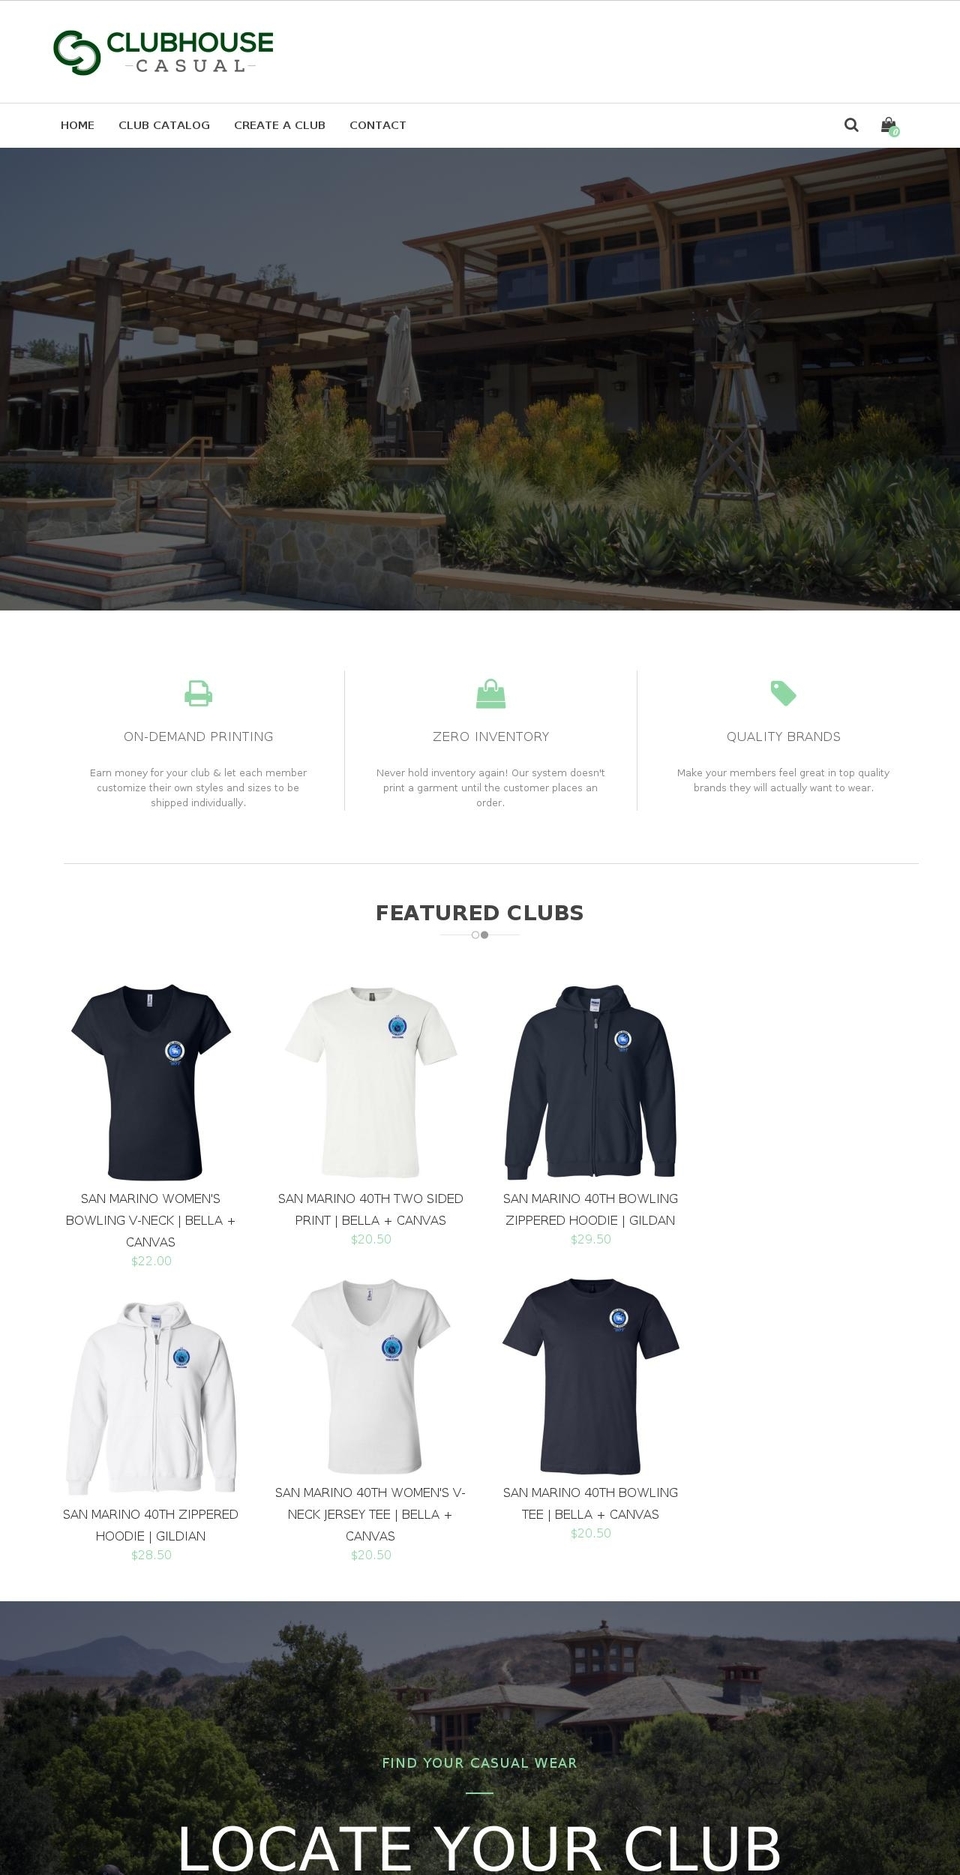 Domino Shopify theme site example clubhousecasual.com